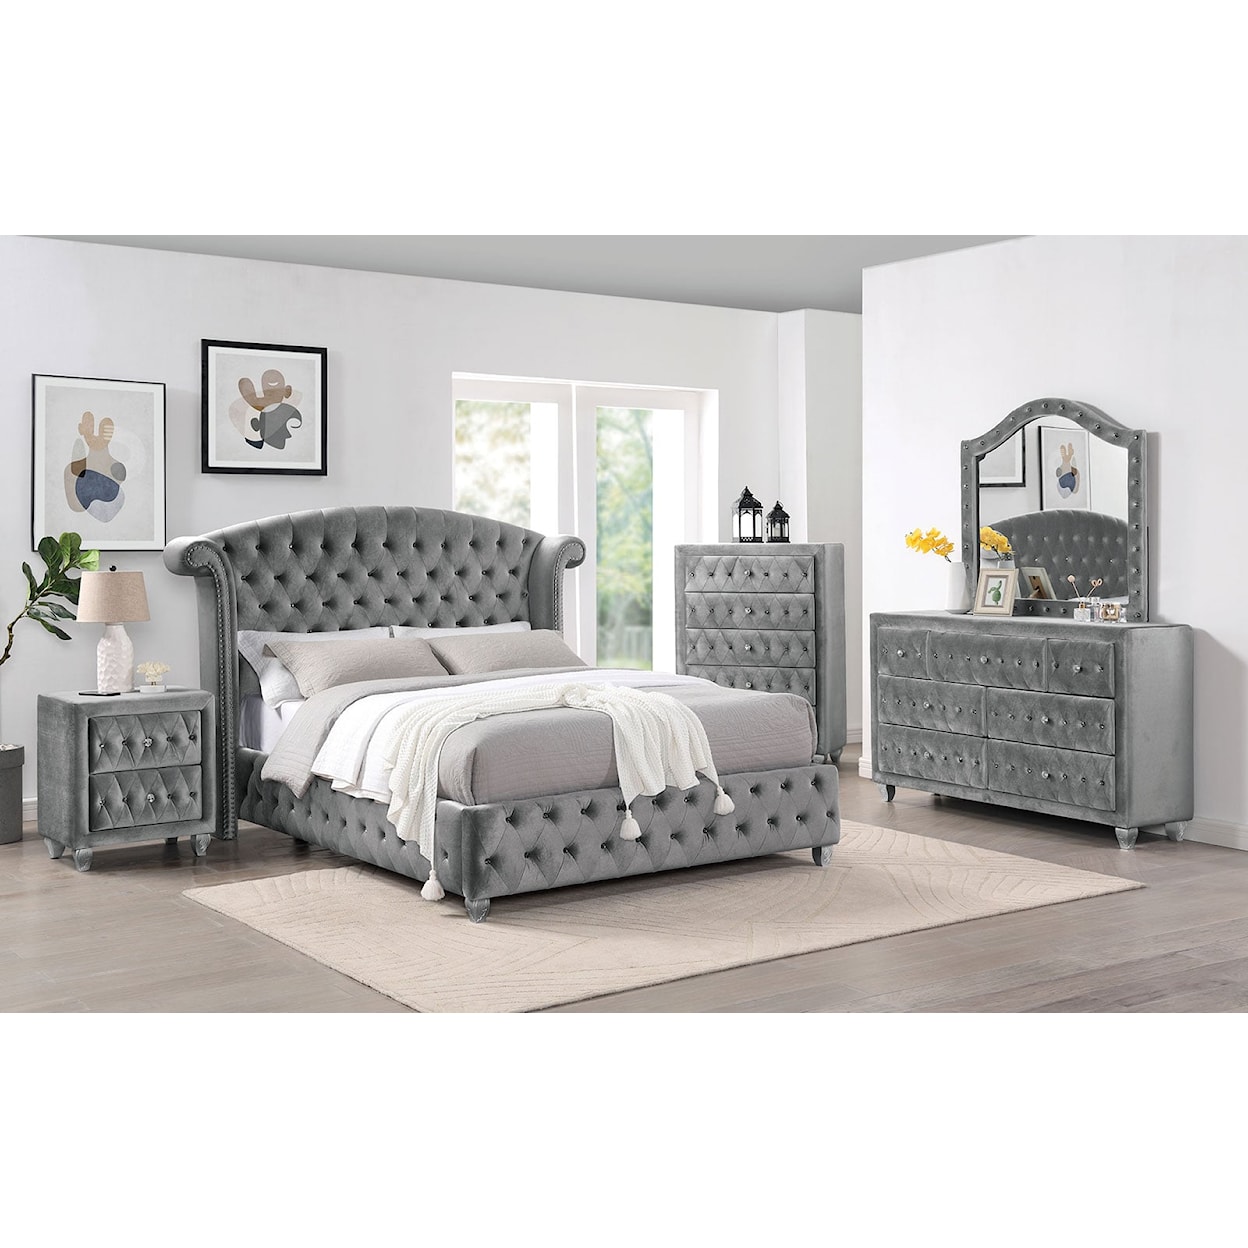 Furniture of America Zohar 5-Piece Queen Bedroom Set with Chest